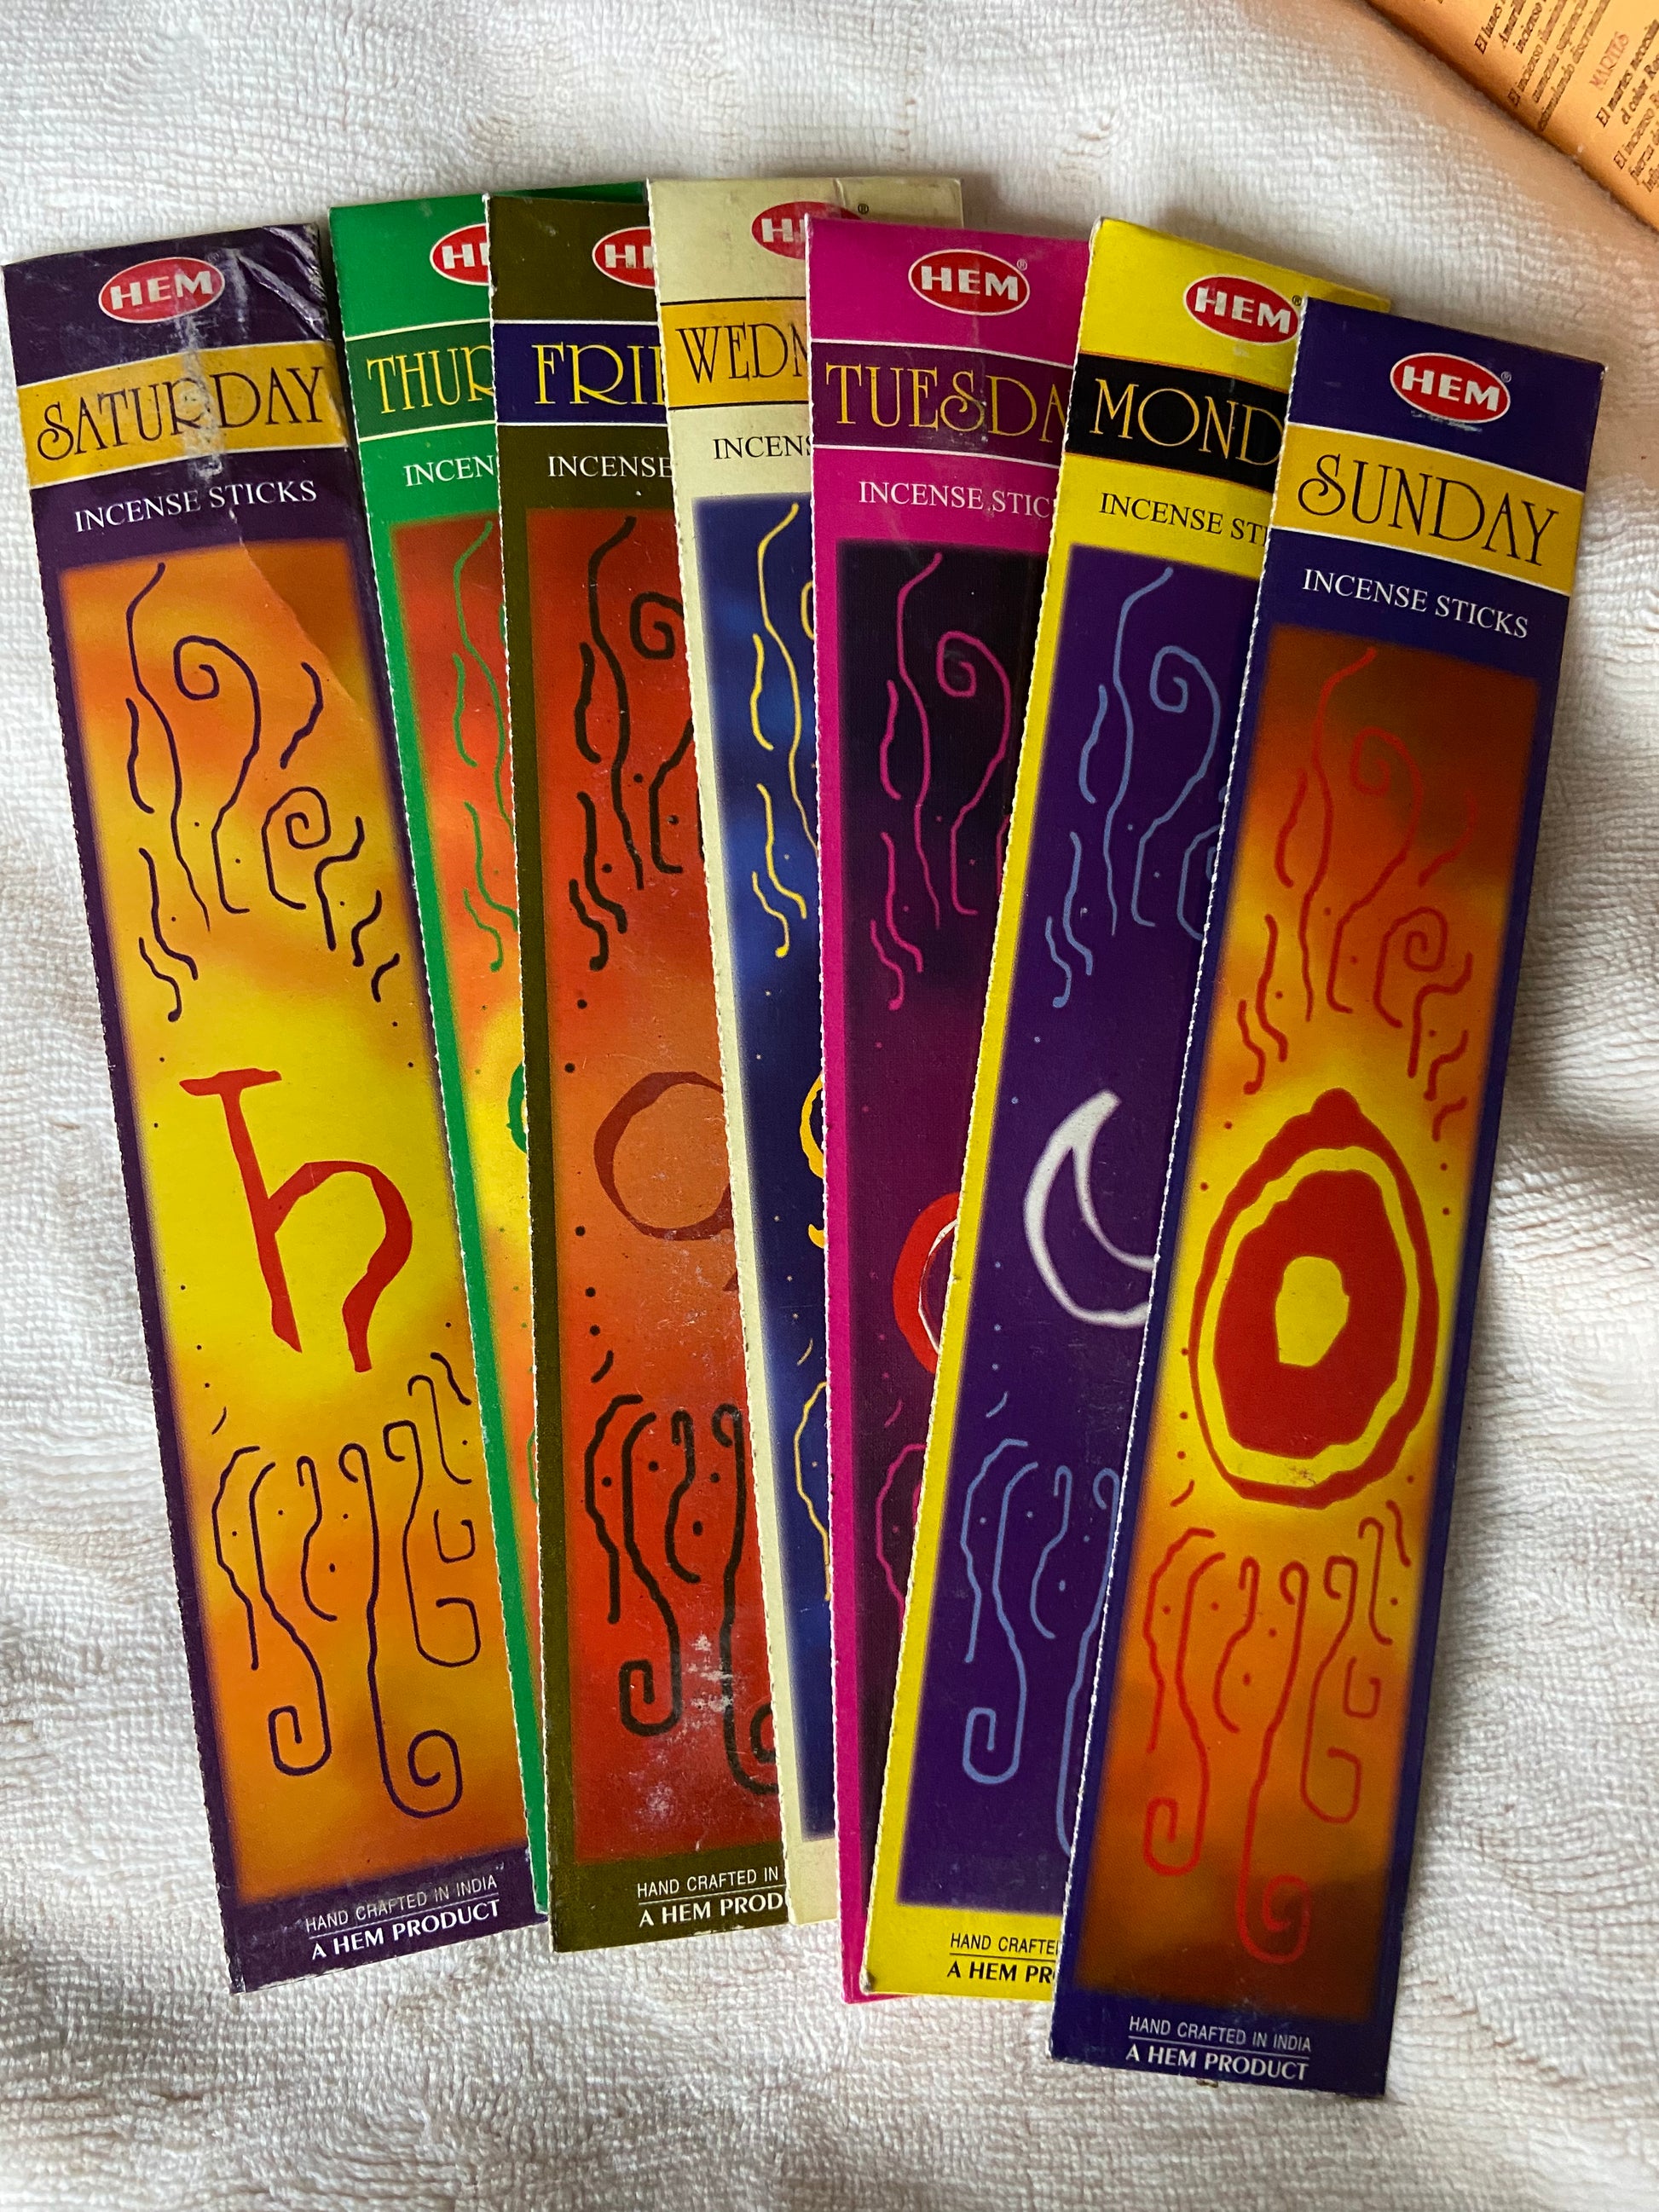  7 Day Incense Sticks - Incense available at Amazing Creations Products . Grab yours for $9.99 today!